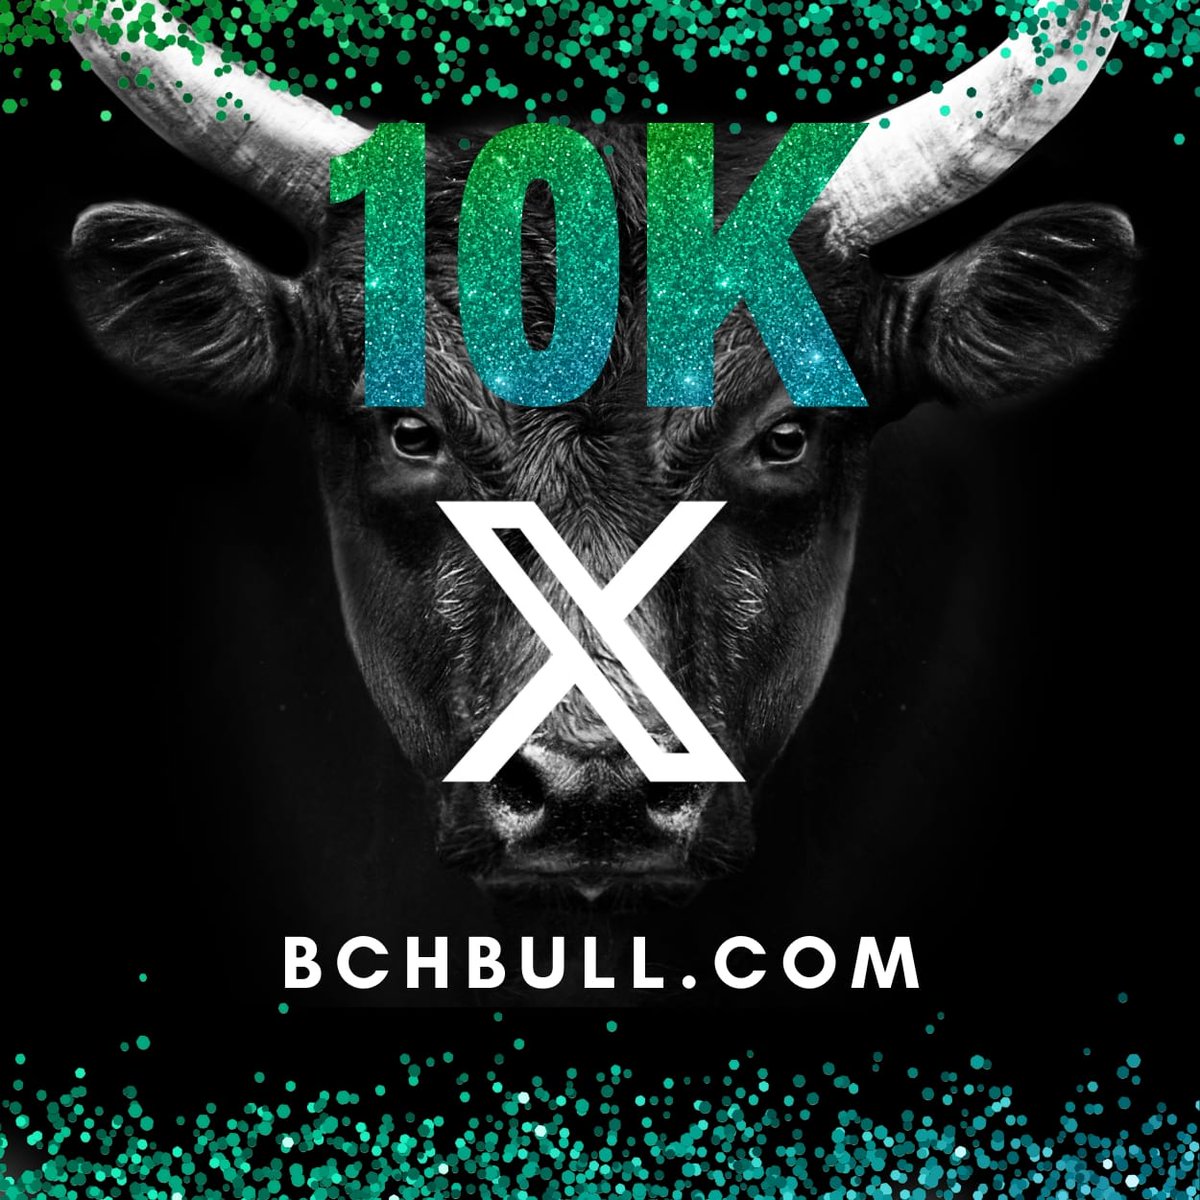 BCH Bull has reached 10k followers on X! Thank you to the growing community for supporting the number one, and fastest growing application on #BitcoinCash mainchain! Be the bull! app.bchbull.com